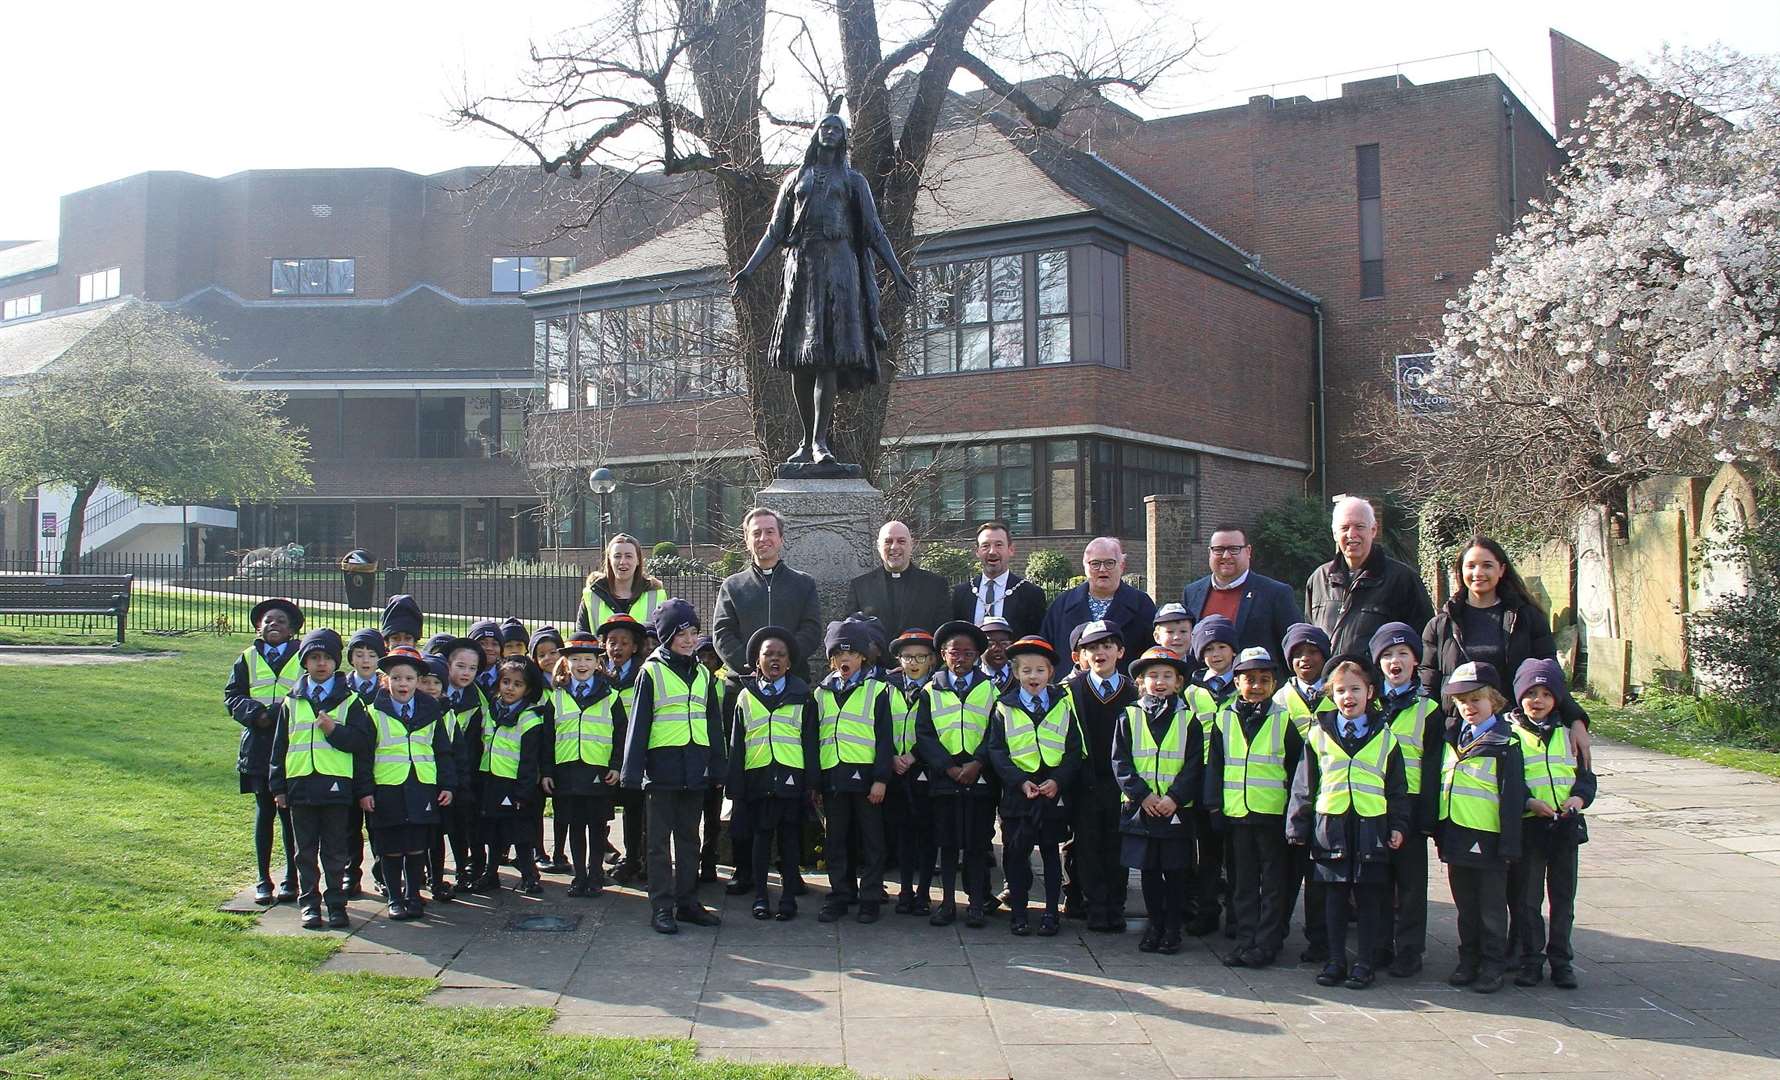 Children from Bronte School attended the service. Picture: Gravesham Borough Council